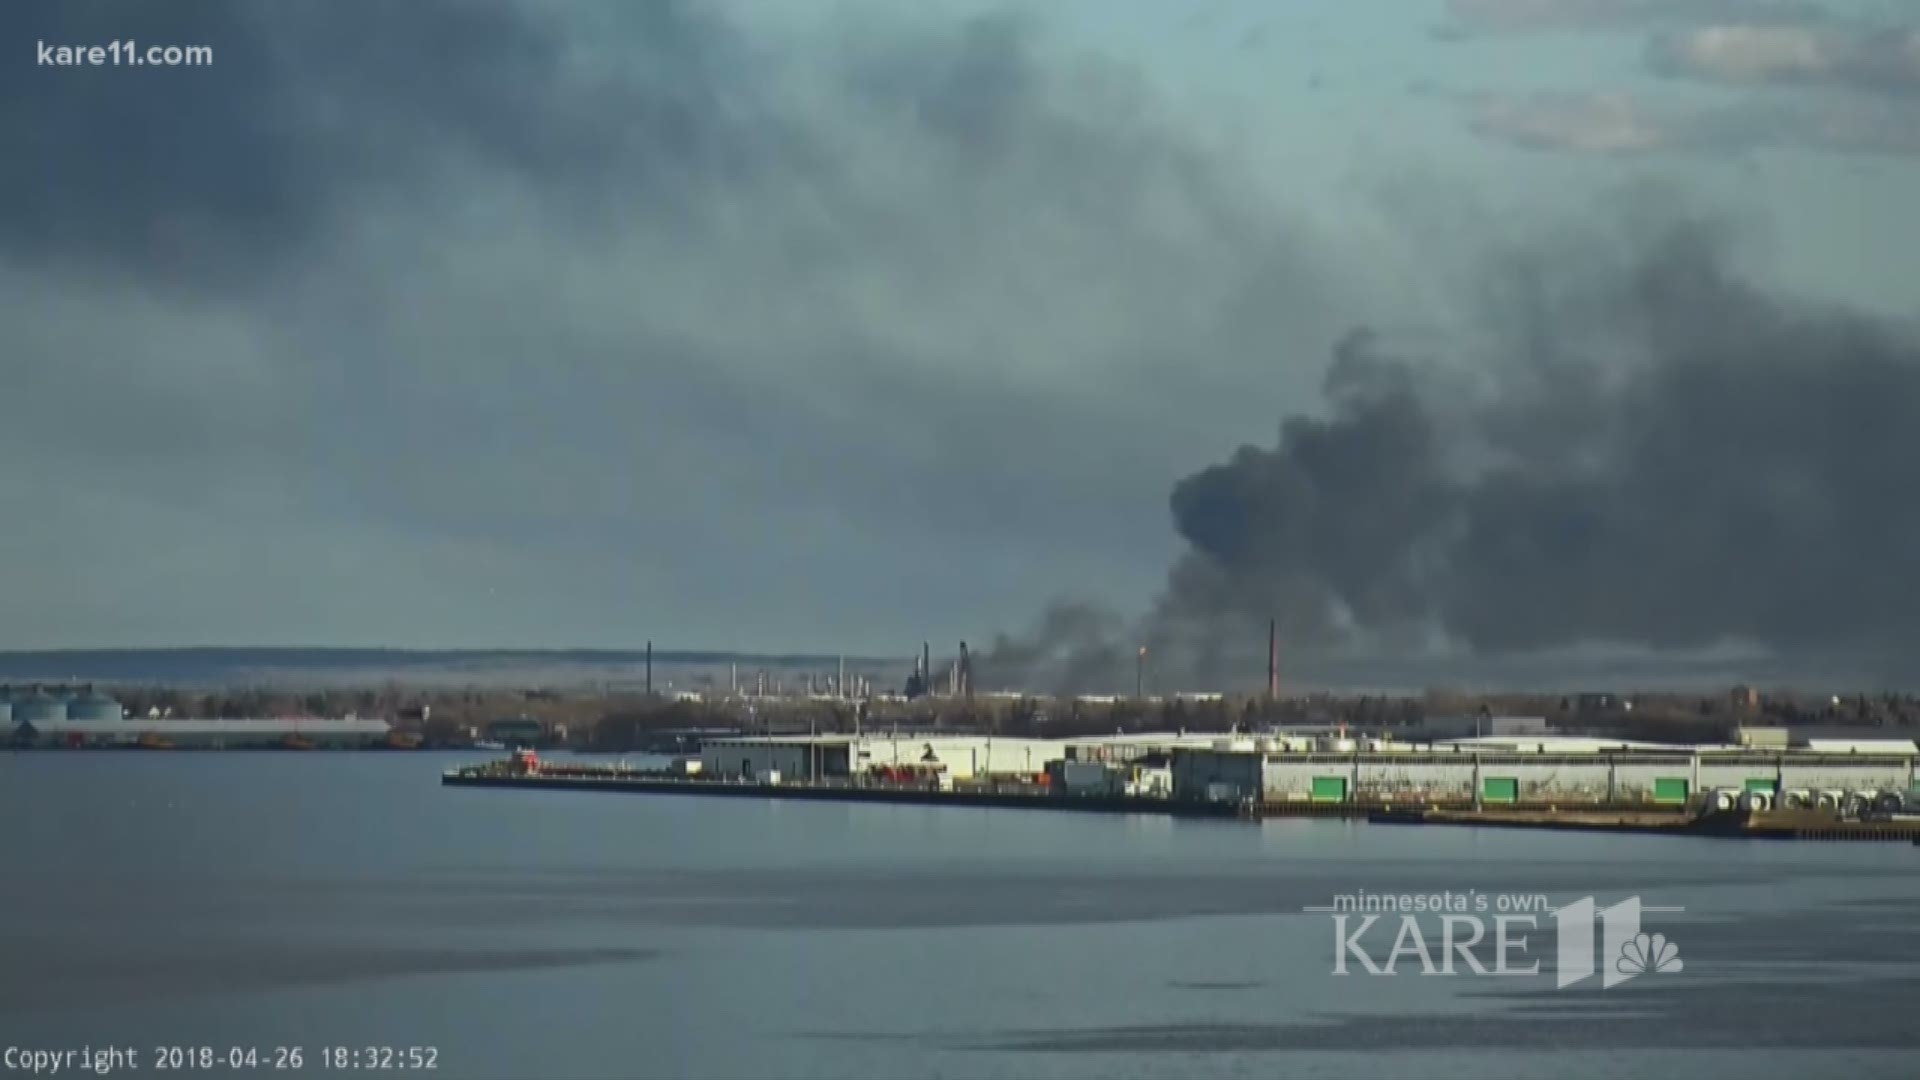 Refinery explosion in Superior, Wisconsin 6:30 p.m. 4-26-18